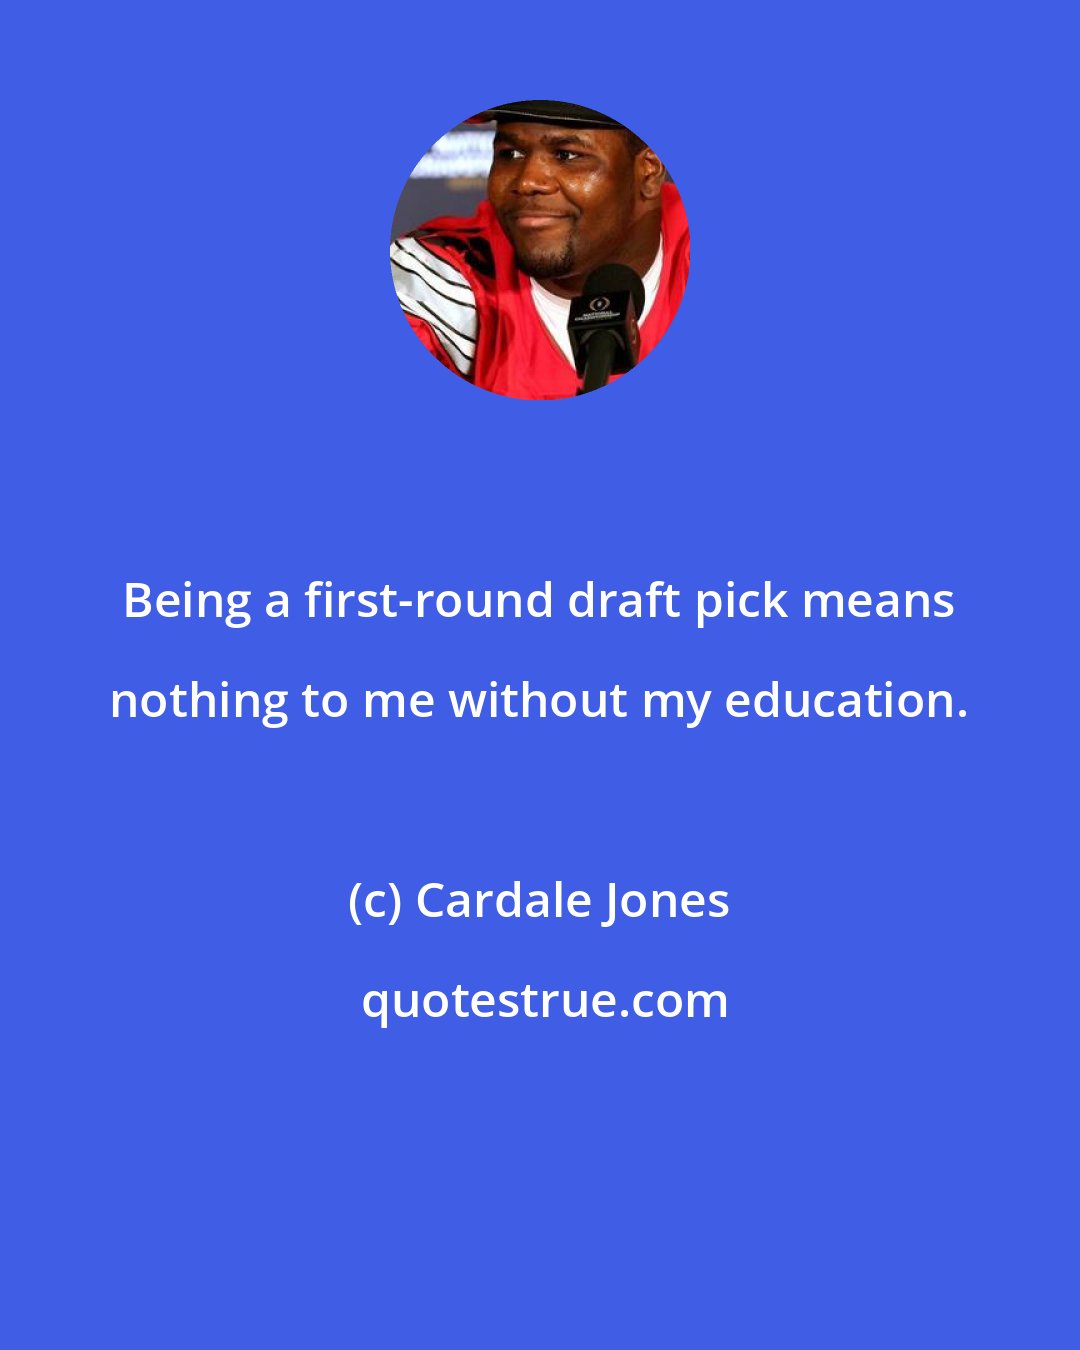 Cardale Jones: Being a first-round draft pick means nothing to me without my education.